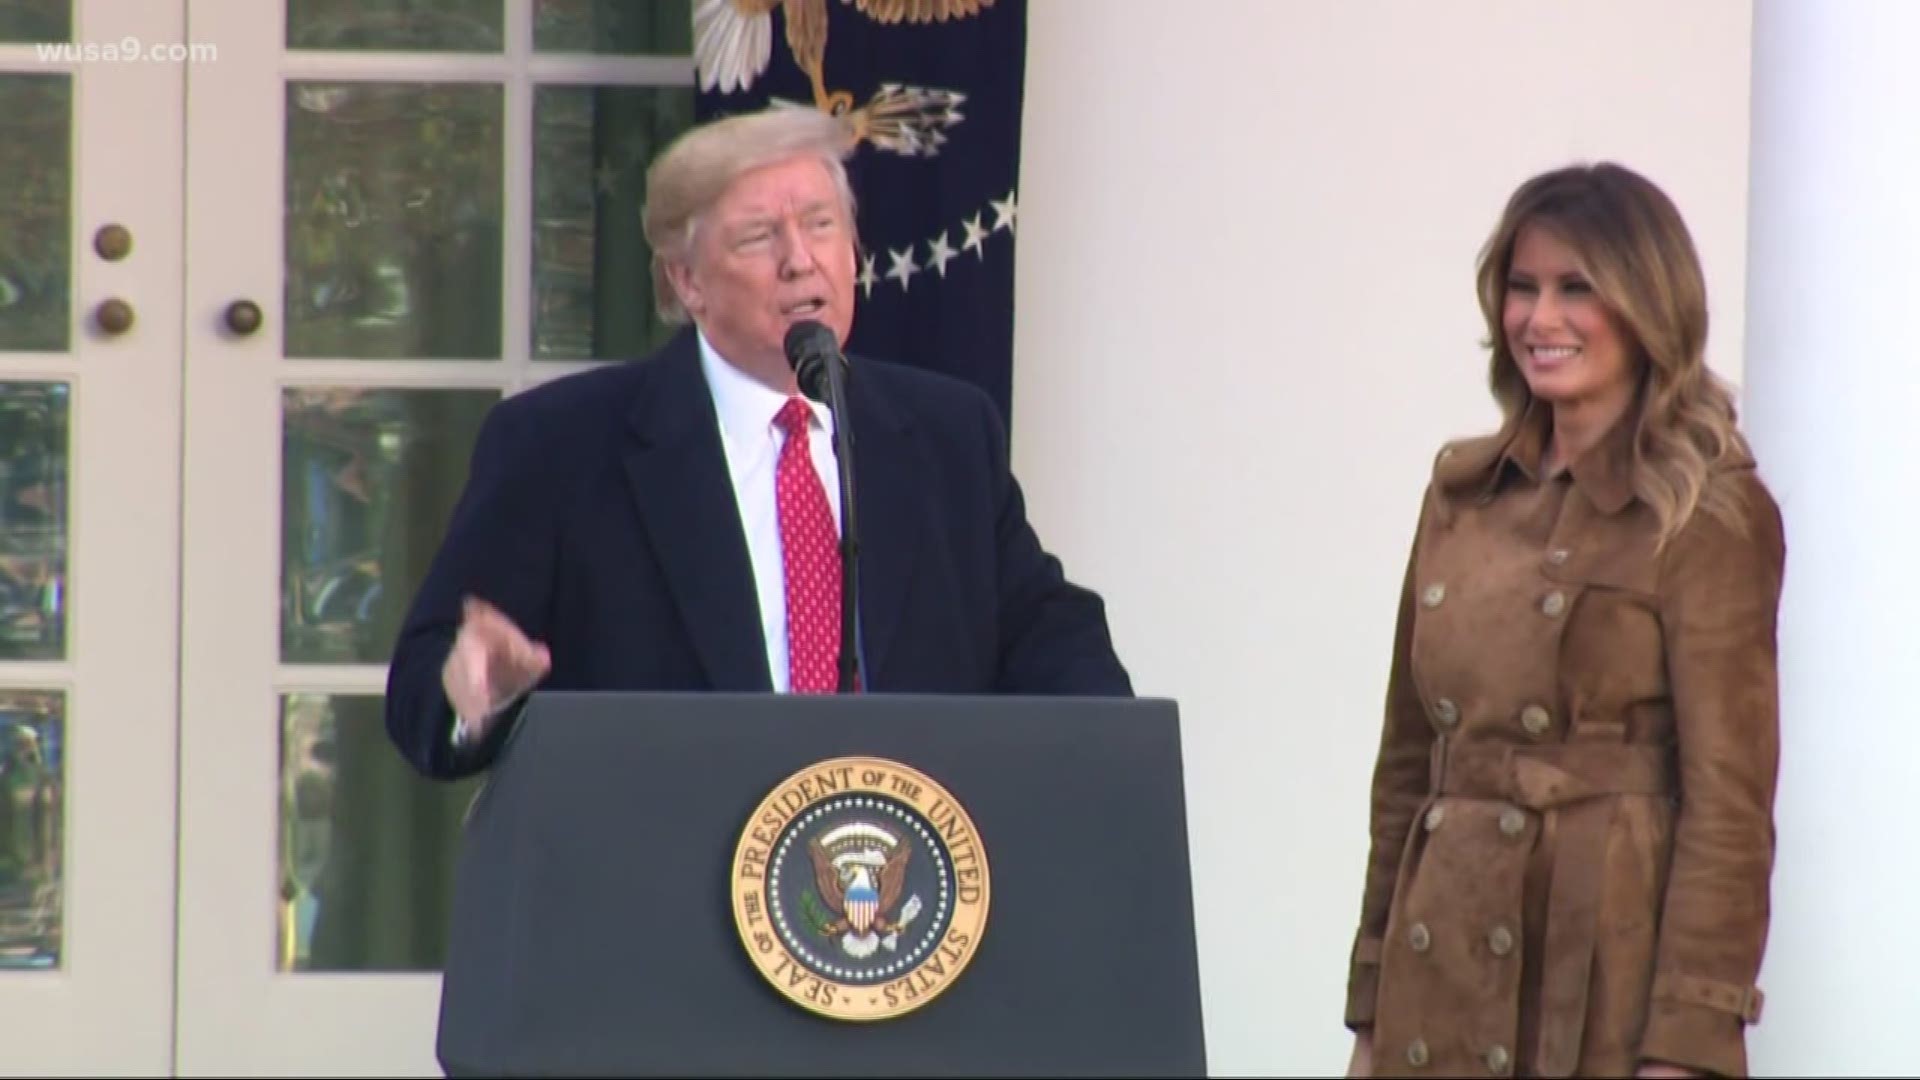 During the turkey pardoning ceremony, President Trump couldn't help but take a jab at reporters, Democrats and the Impeachment Inquiry.